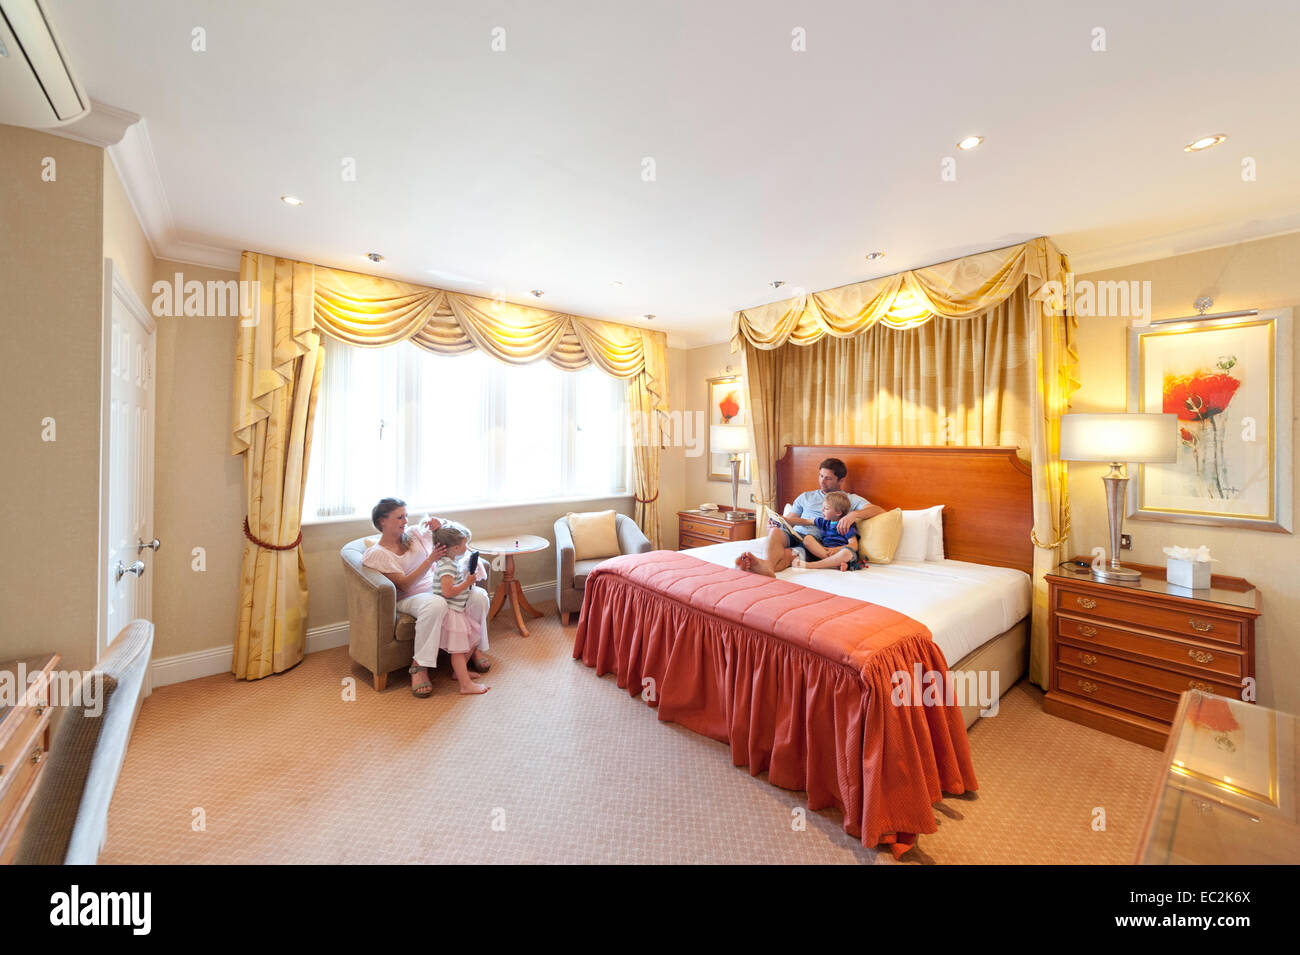 A family relaxing in a hotel bedroom Stock Photo